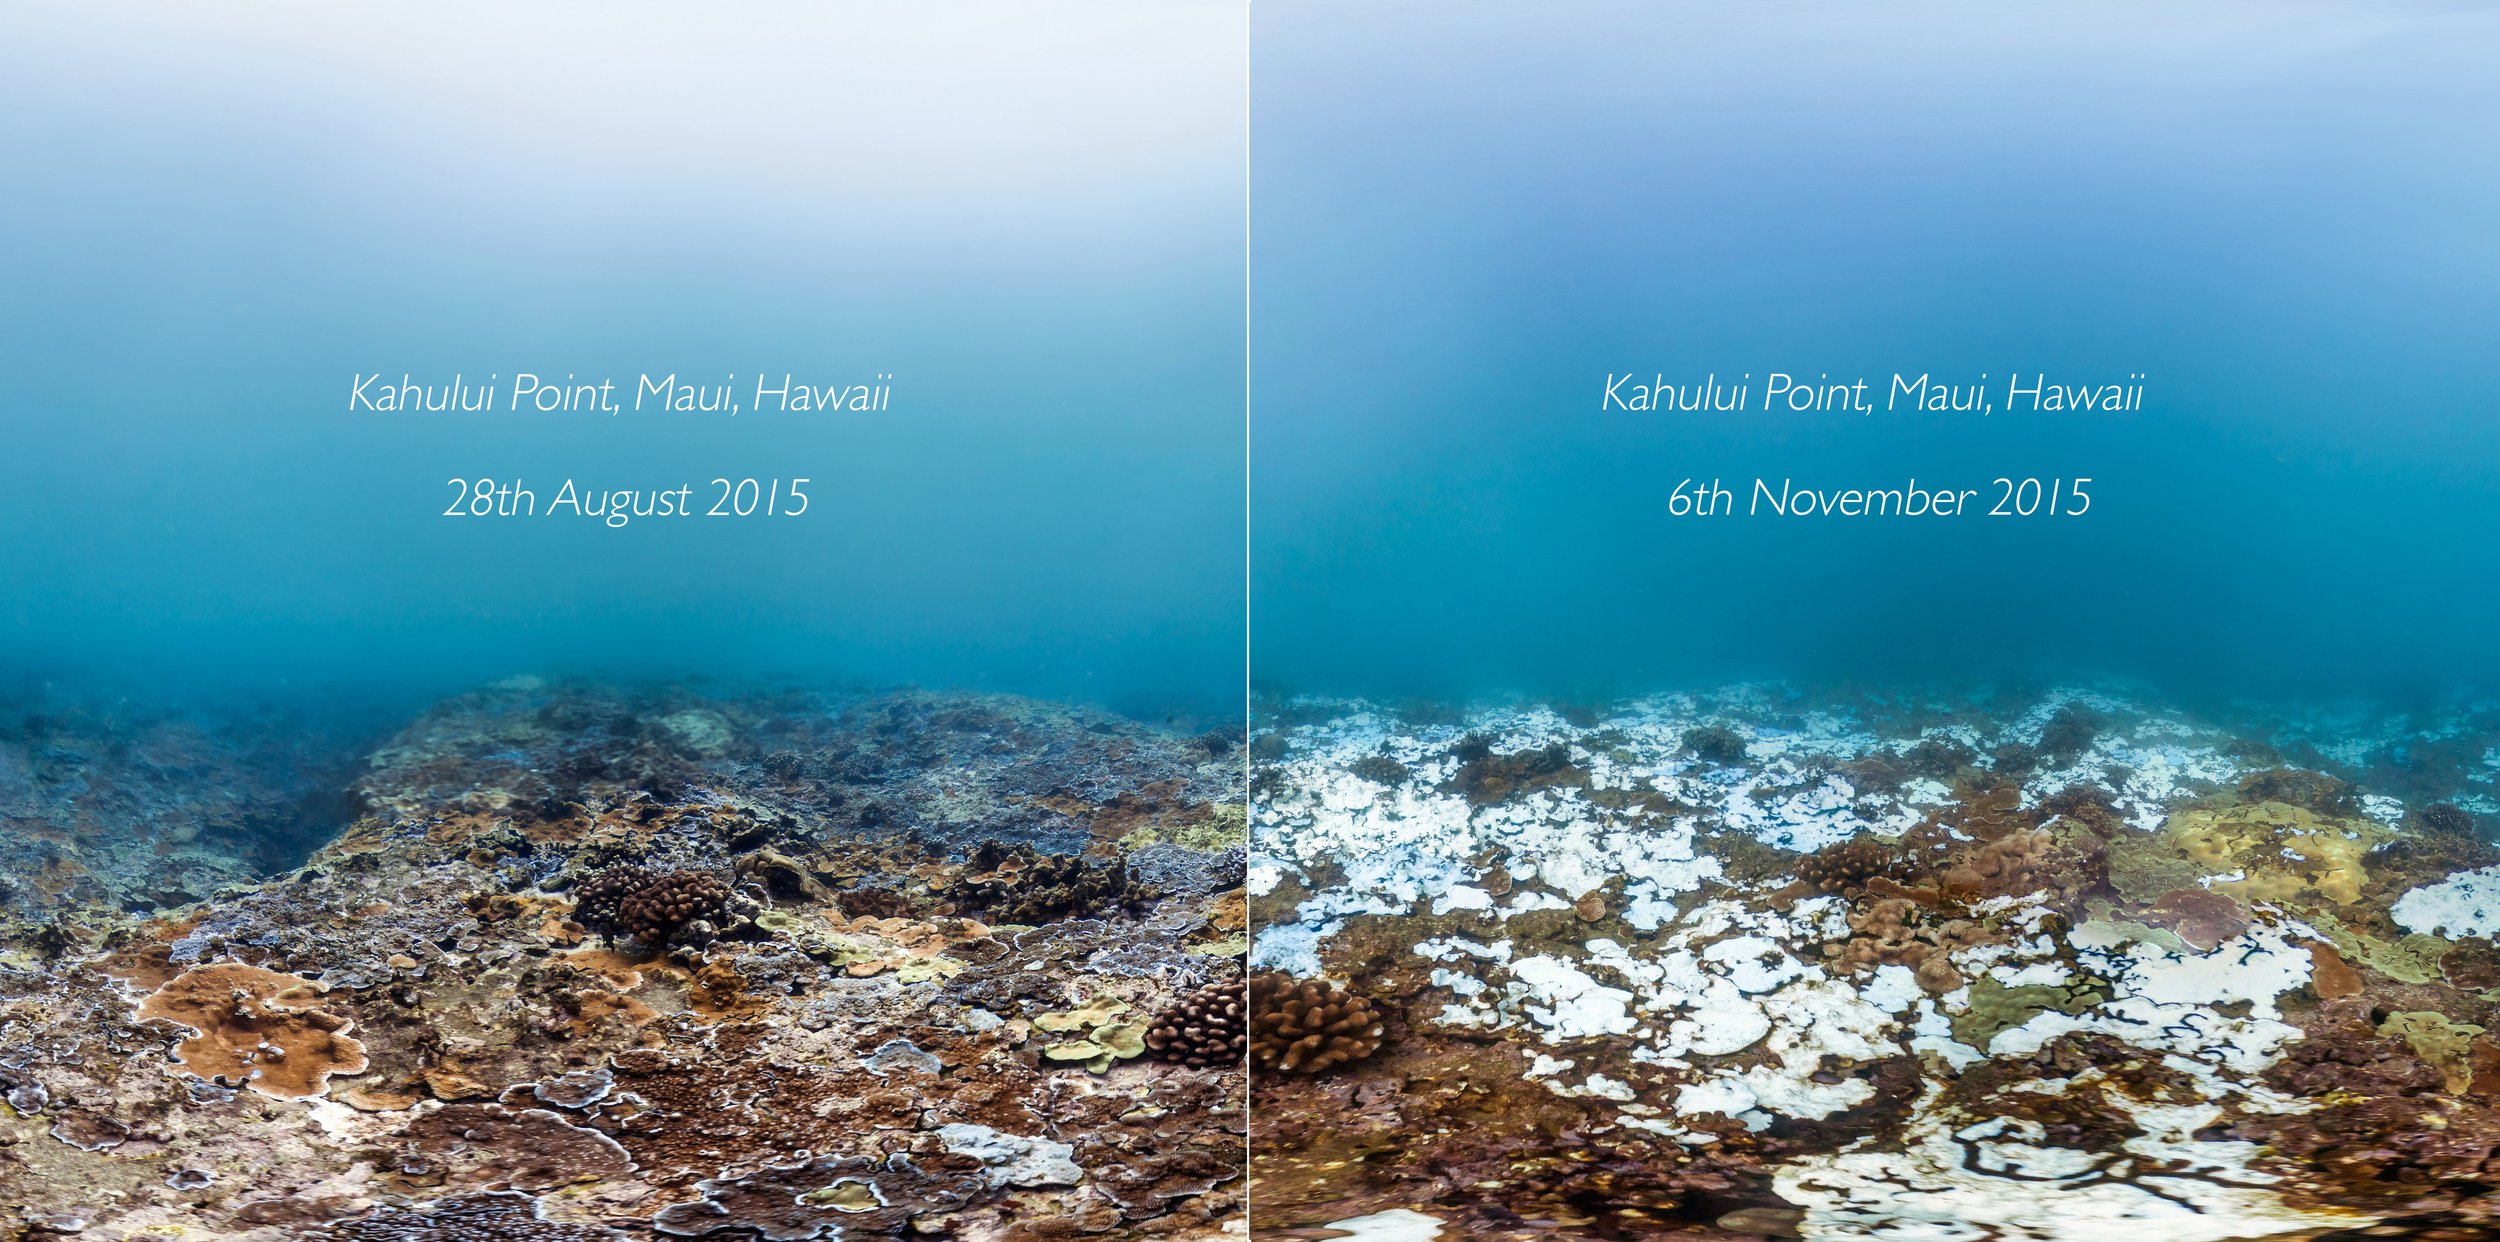 14 Before And After Coral Bleaching in Hawaii.jpeg